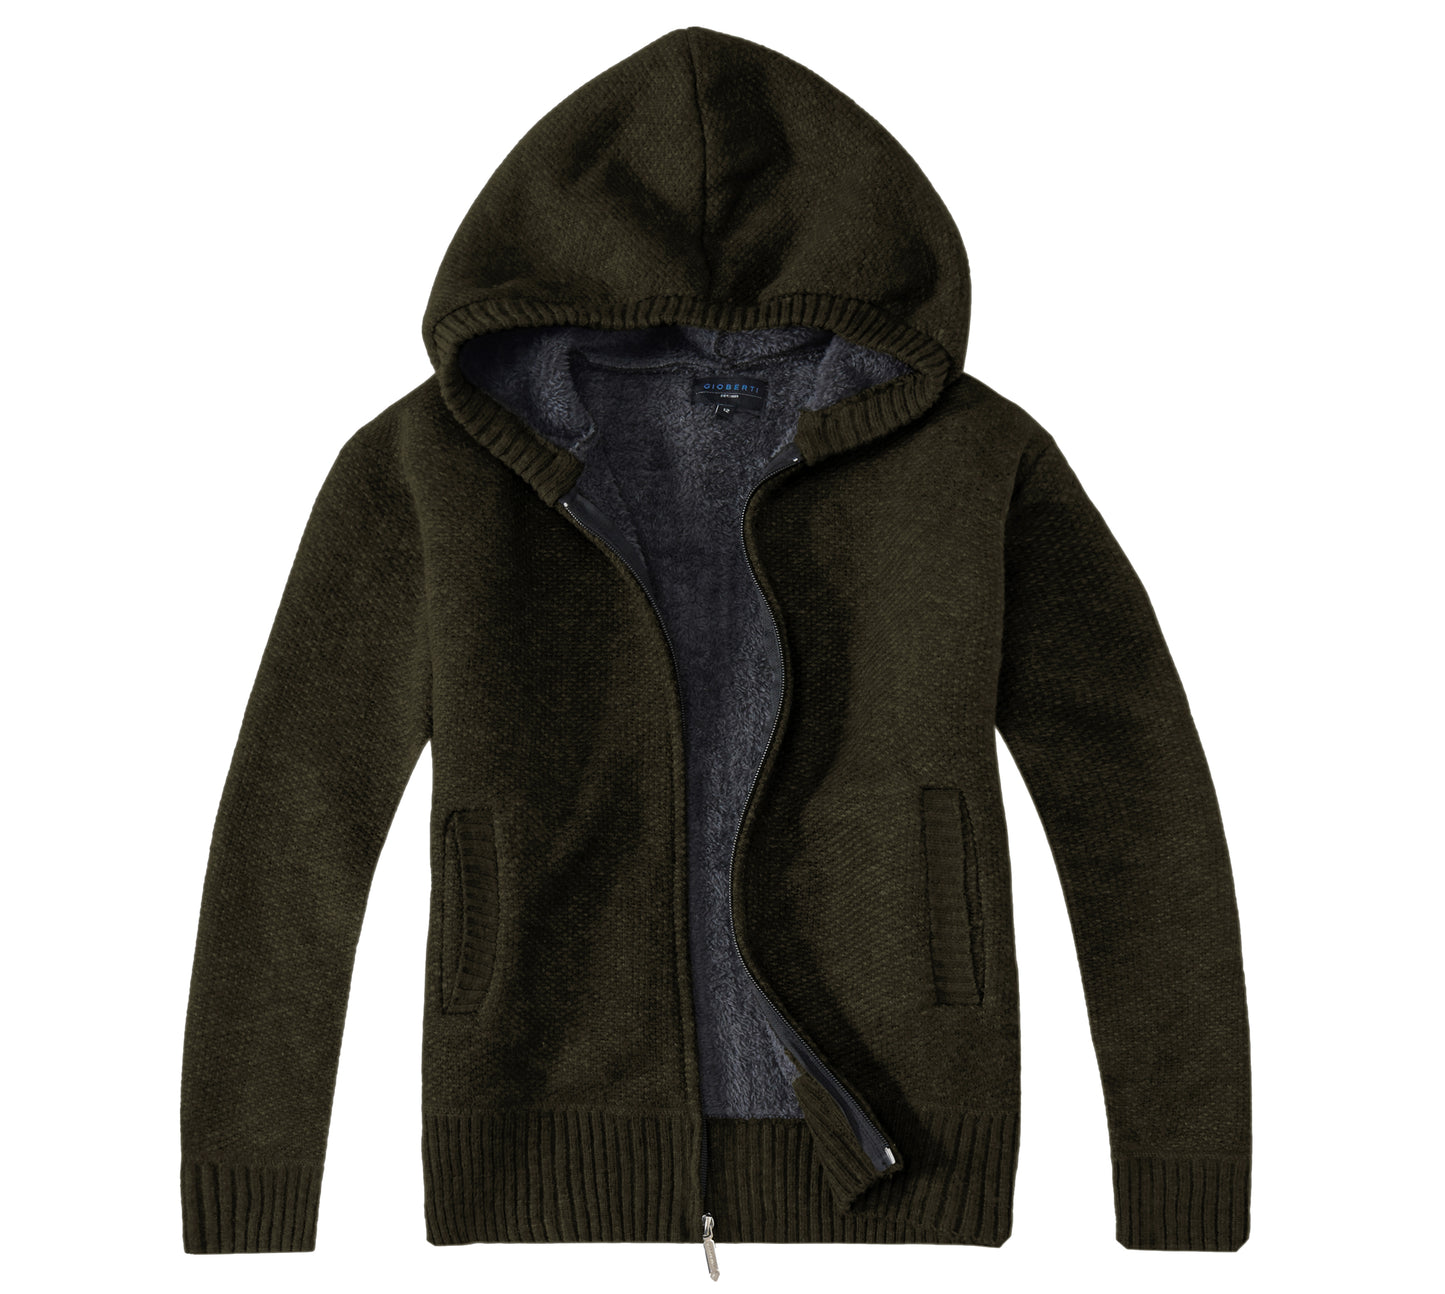 Full Zip Knitted Cardigan Sweater with Hoody and Sherpa Lining - Olive